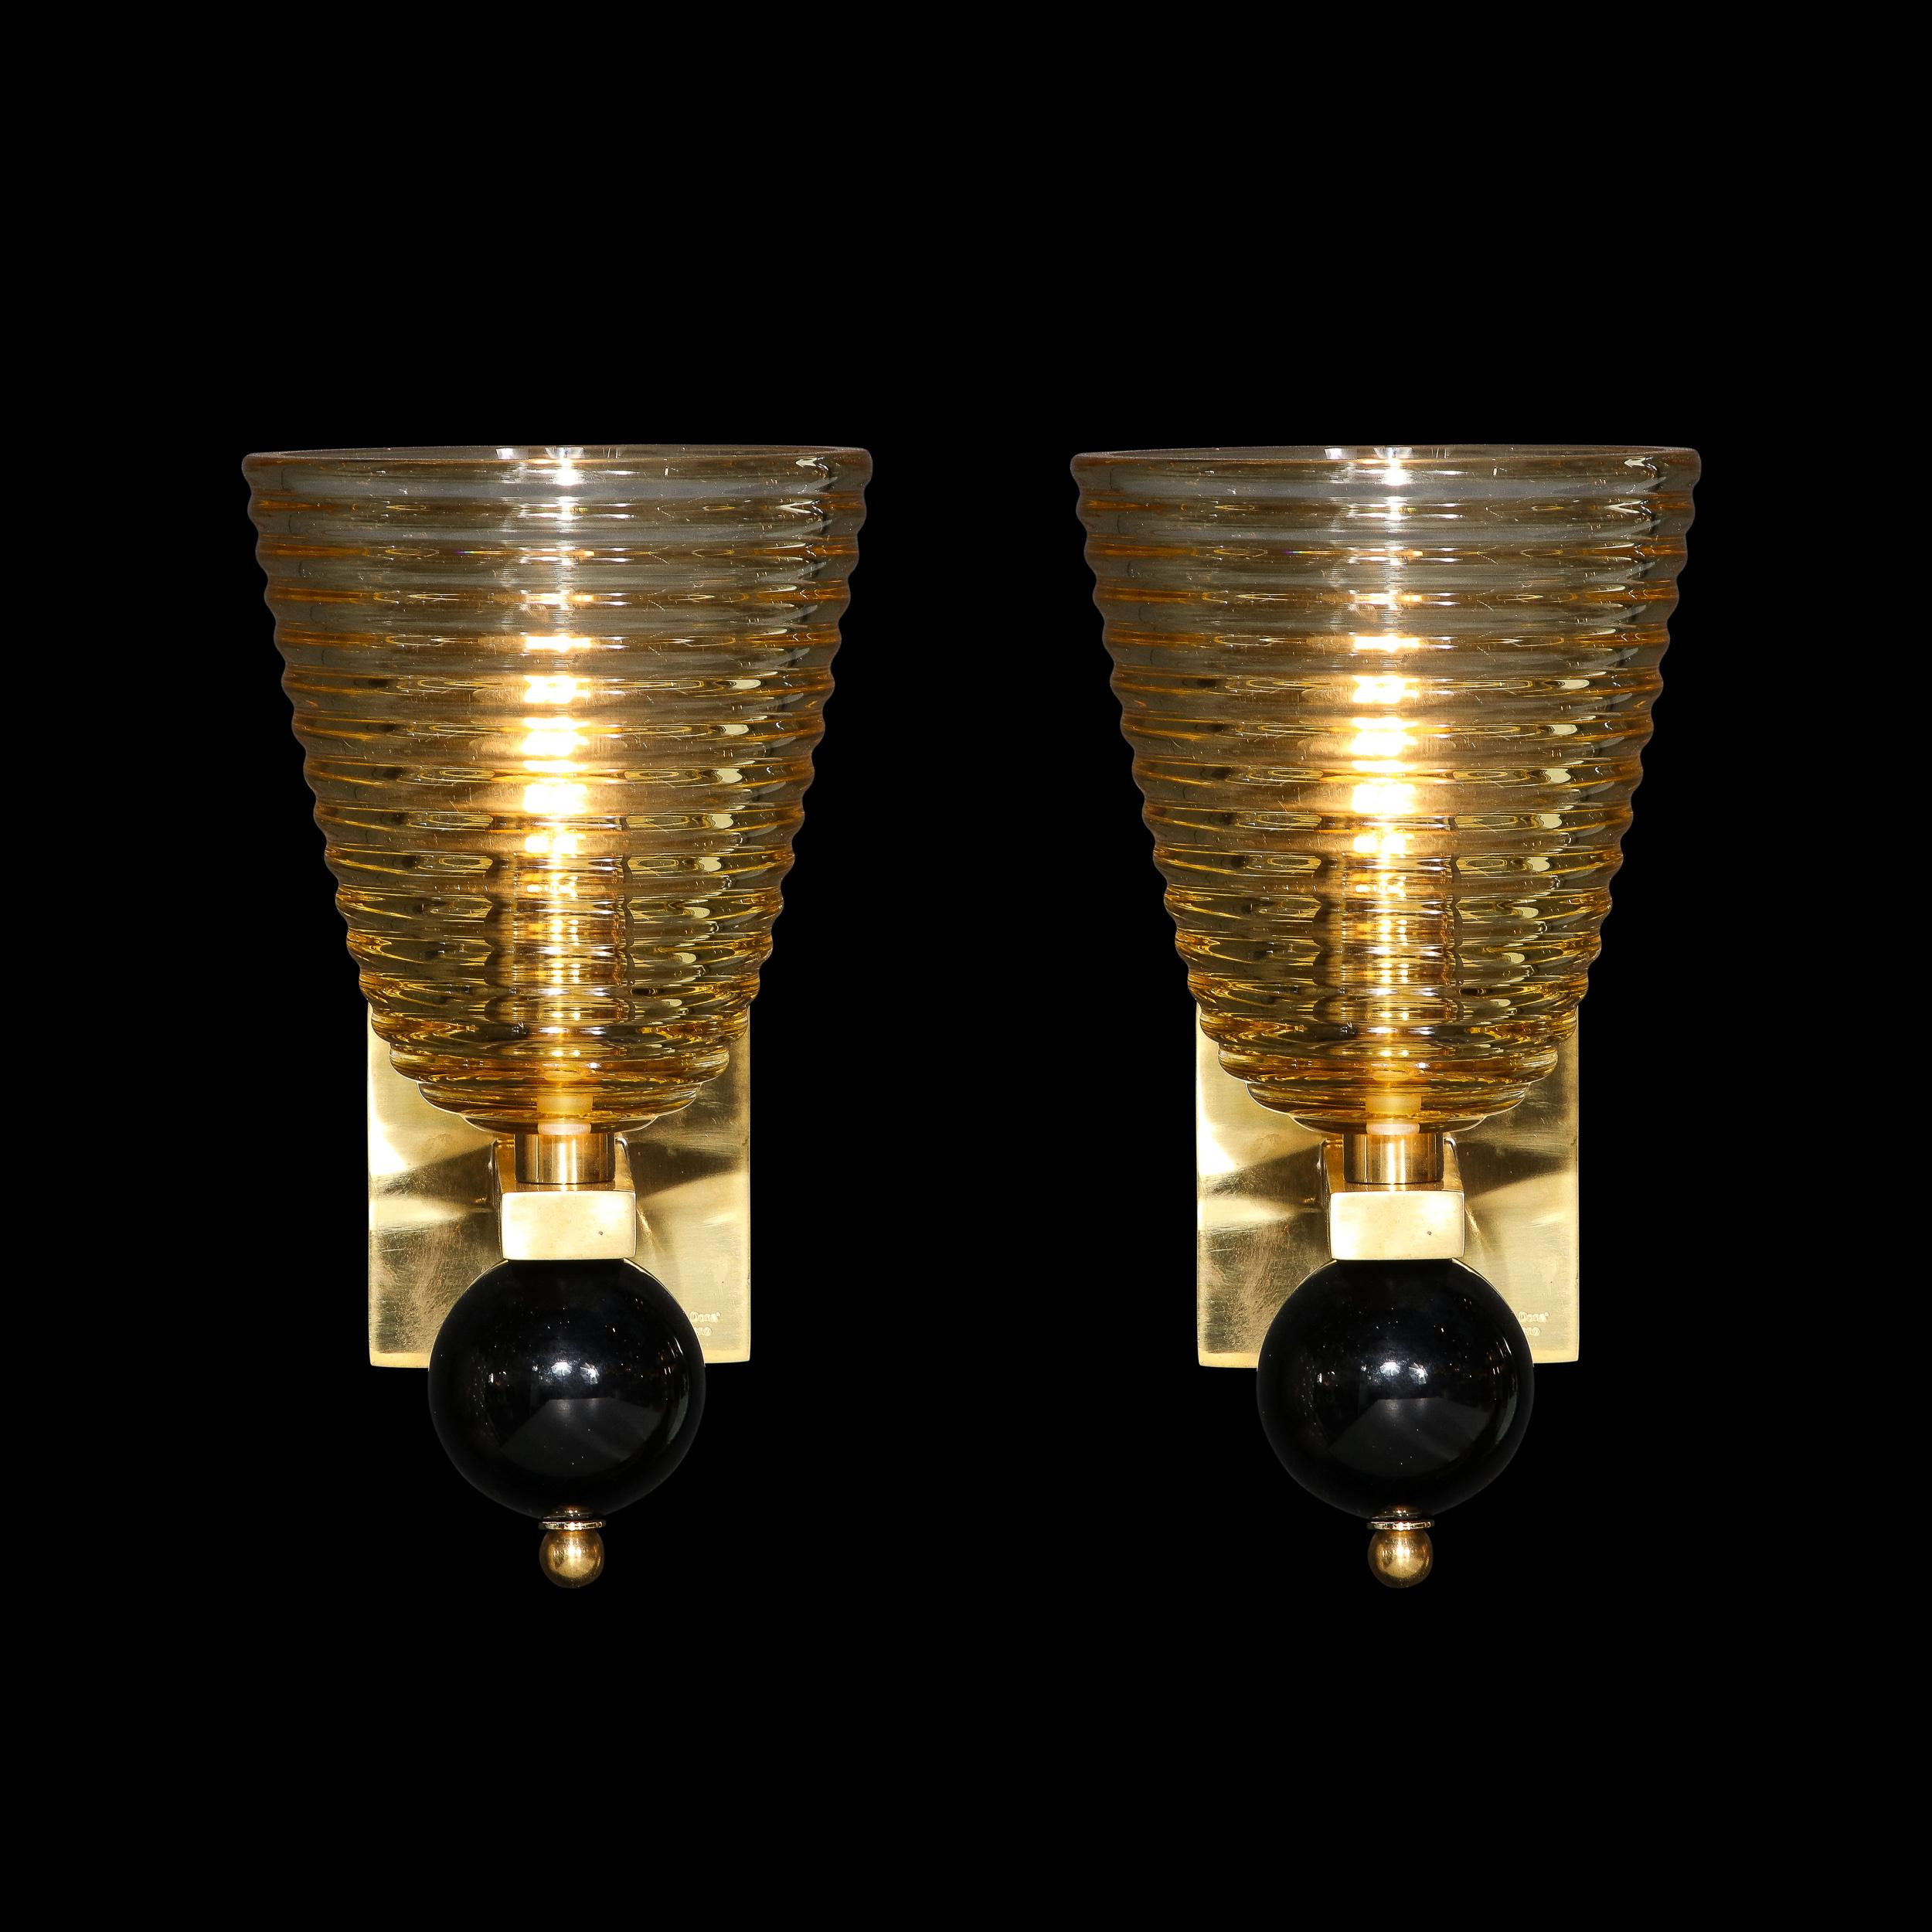 This stunning and graphic pair of modernist sconces were realized in Murano, Italy- the island off the coast of Venice renowned for centuries for its superlative glass production. They feature conical bodies with dramatically ribbed silhouettes that